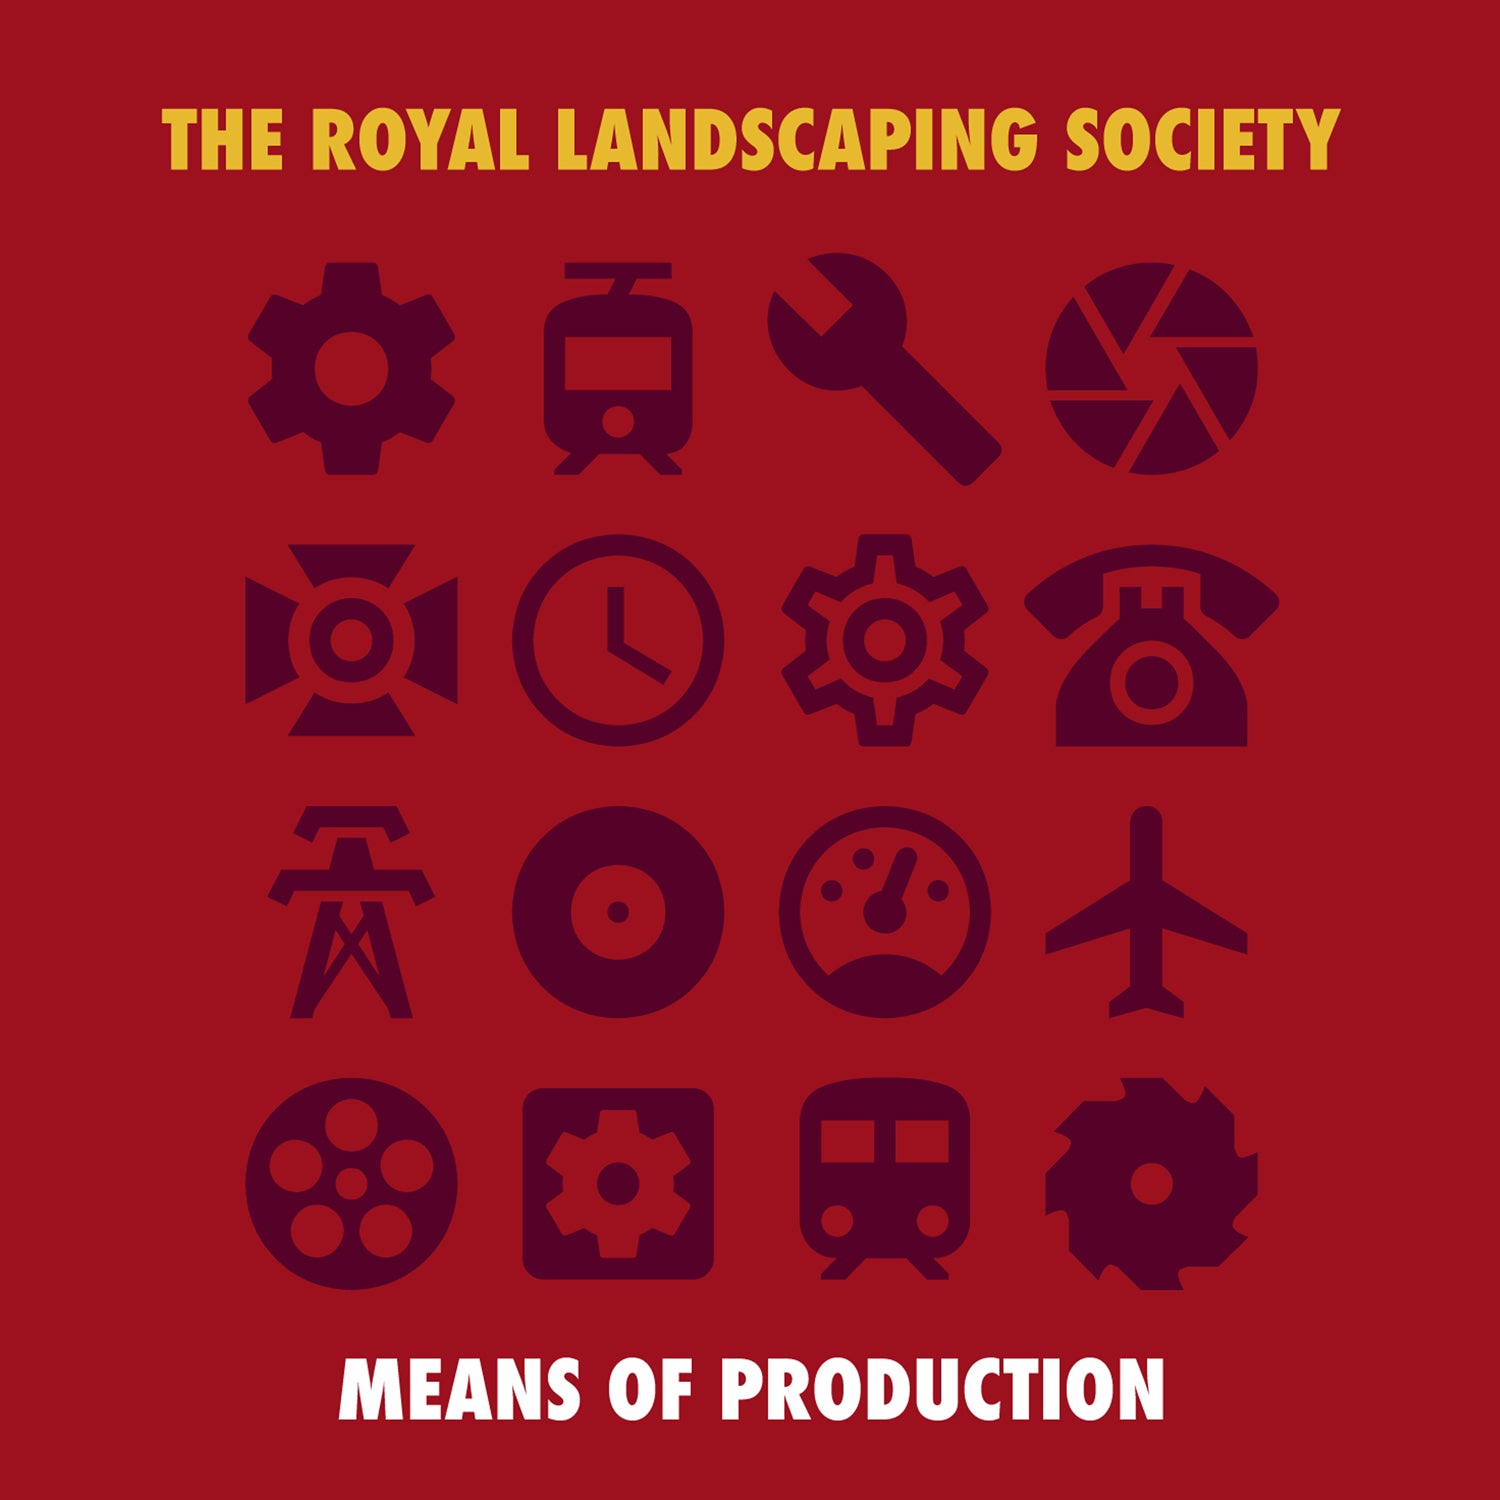 Royal Landscaping Society, The - Means of Production